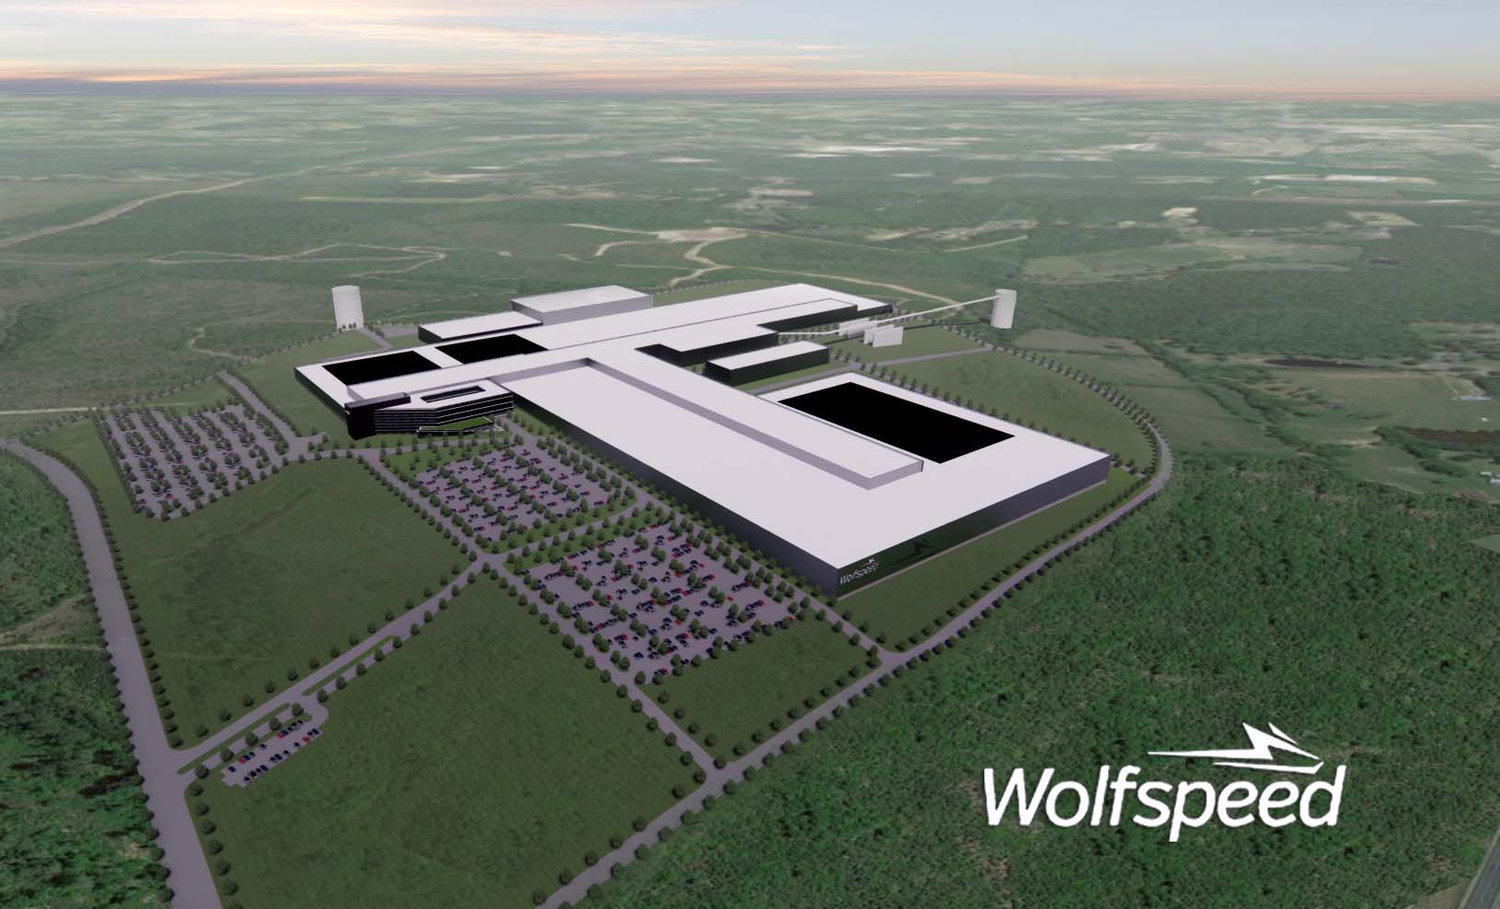 Wolfspeed selects Chatham County, North Carolina for world’s largest Silicon Carbide Materials facility. Above, an artist’s rendering shows what the new facility could look like.